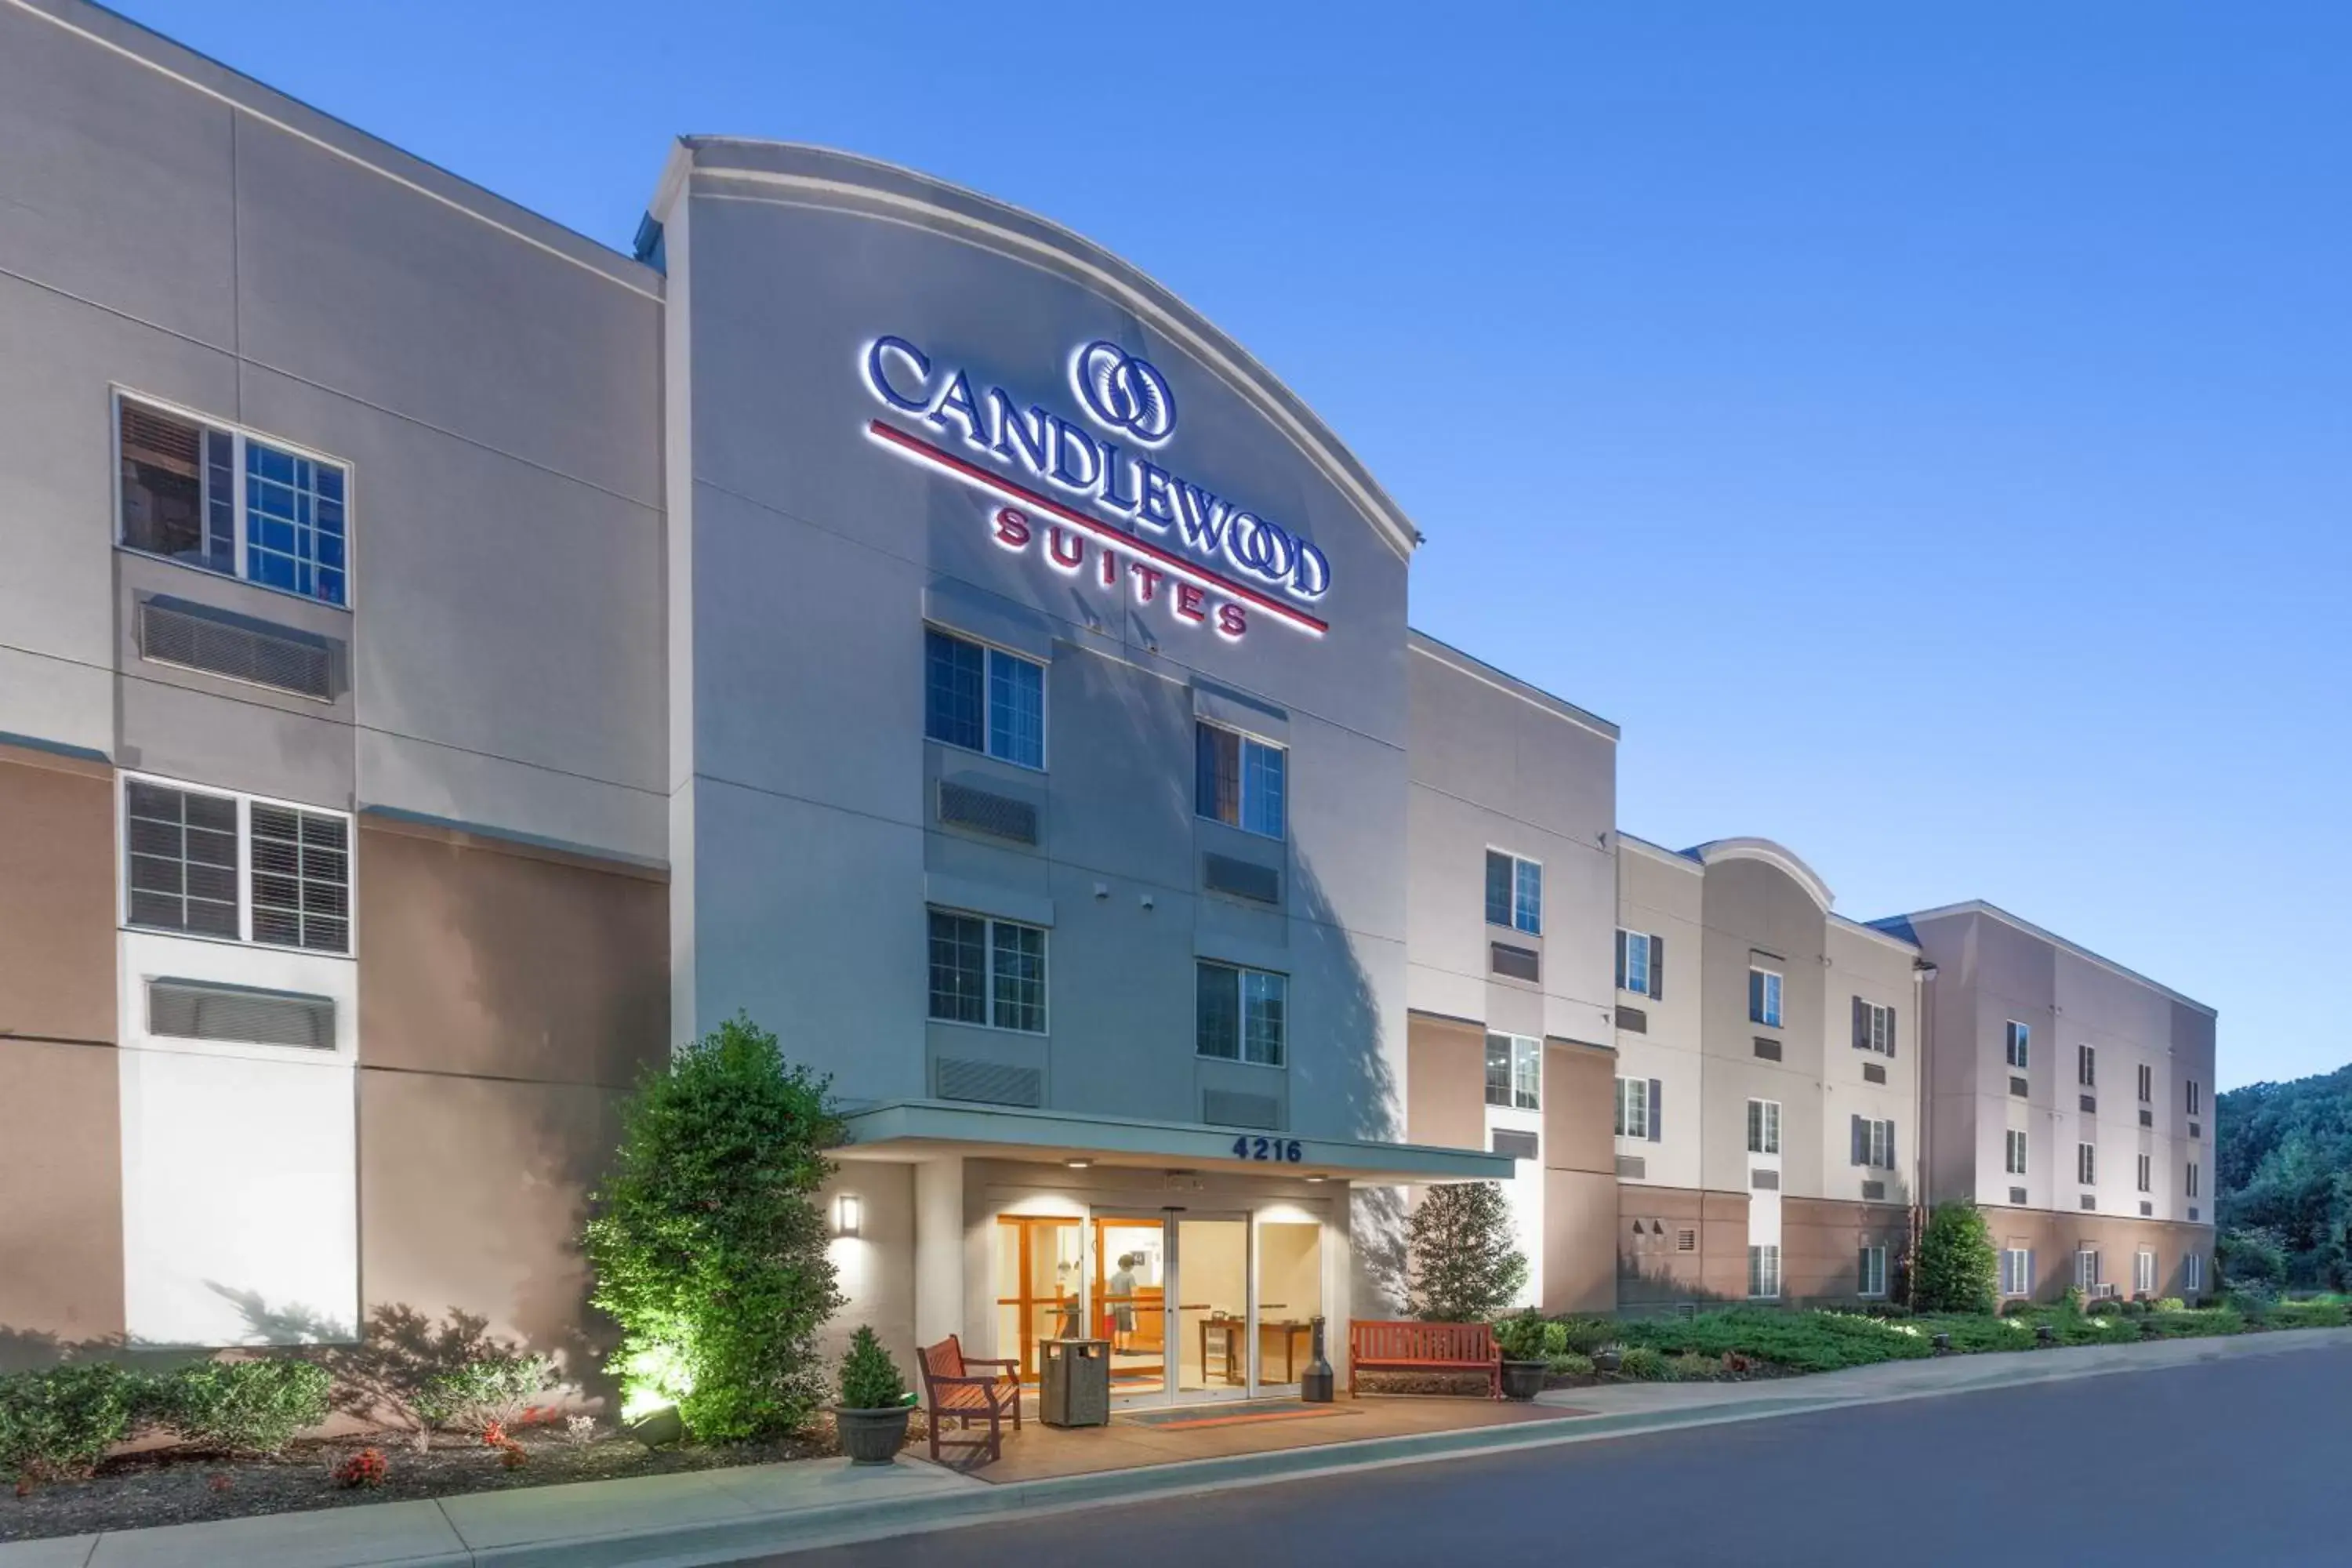 Property building in Candlewood Suites Aberdeen-Bel Air, an IHG Hotel